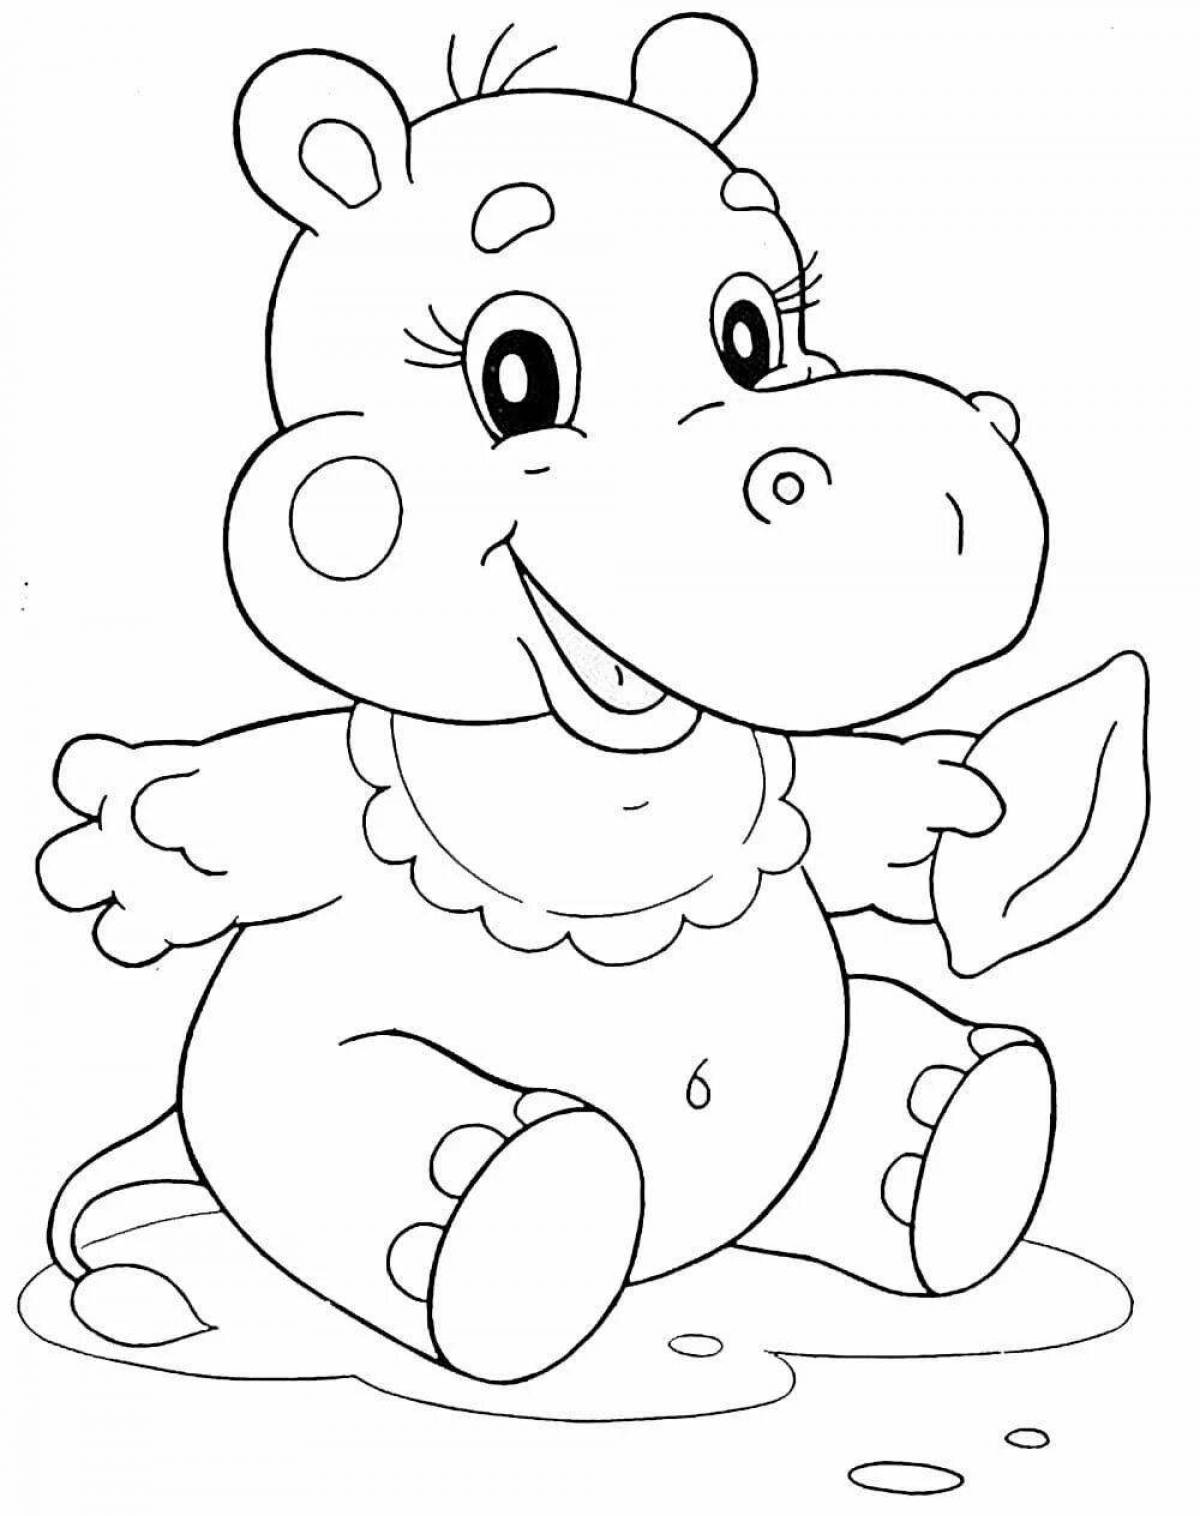 Sweet animal coloring pages for 5 year olds